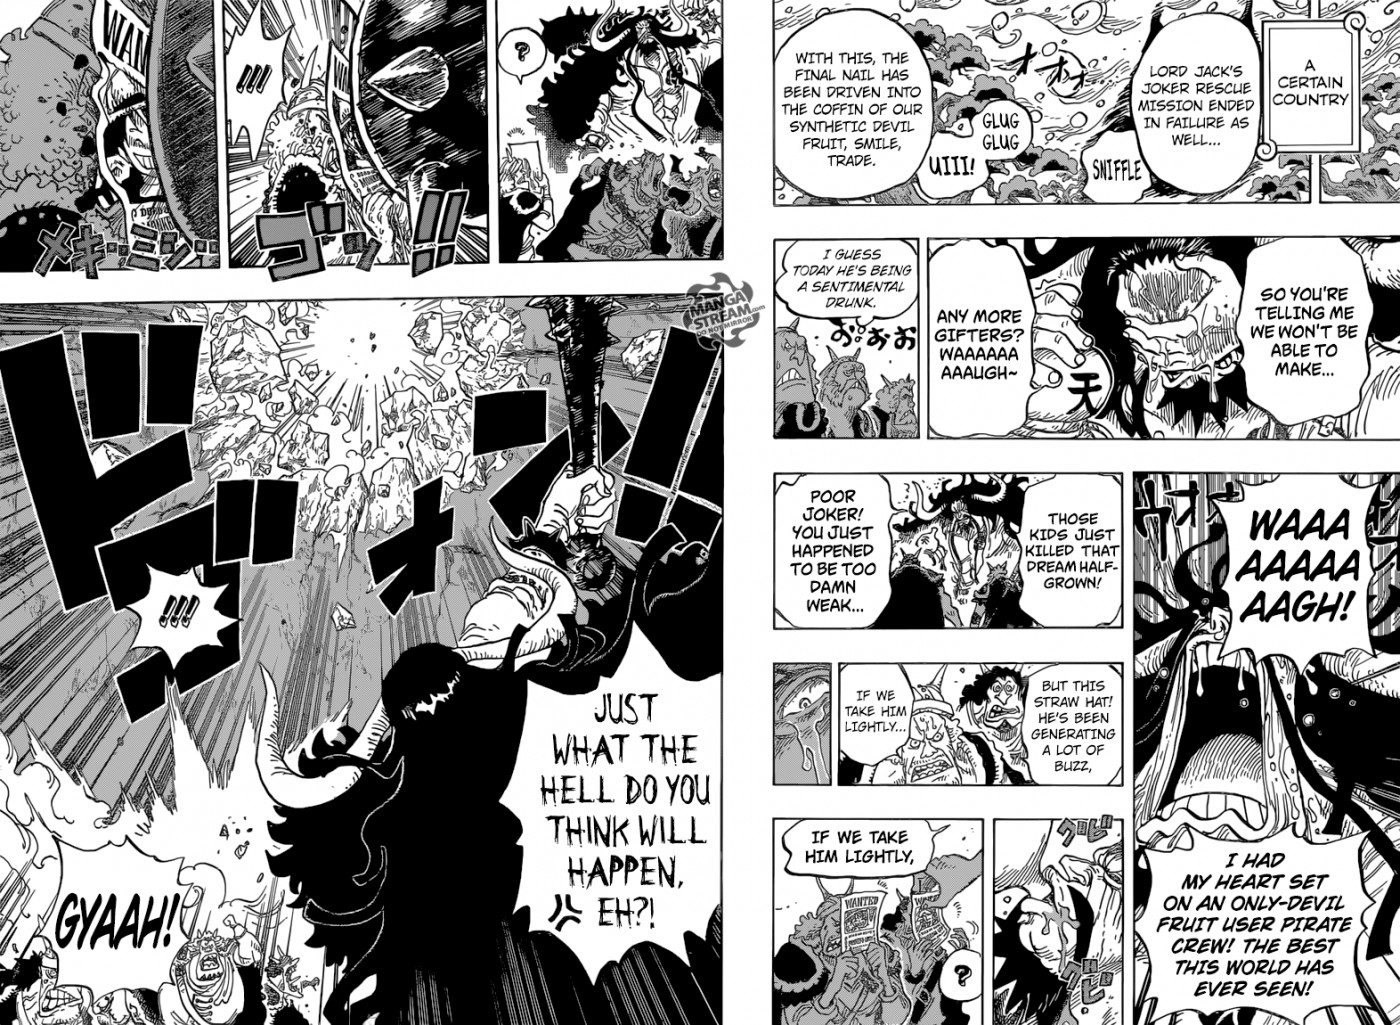 One Piece Chapter 824